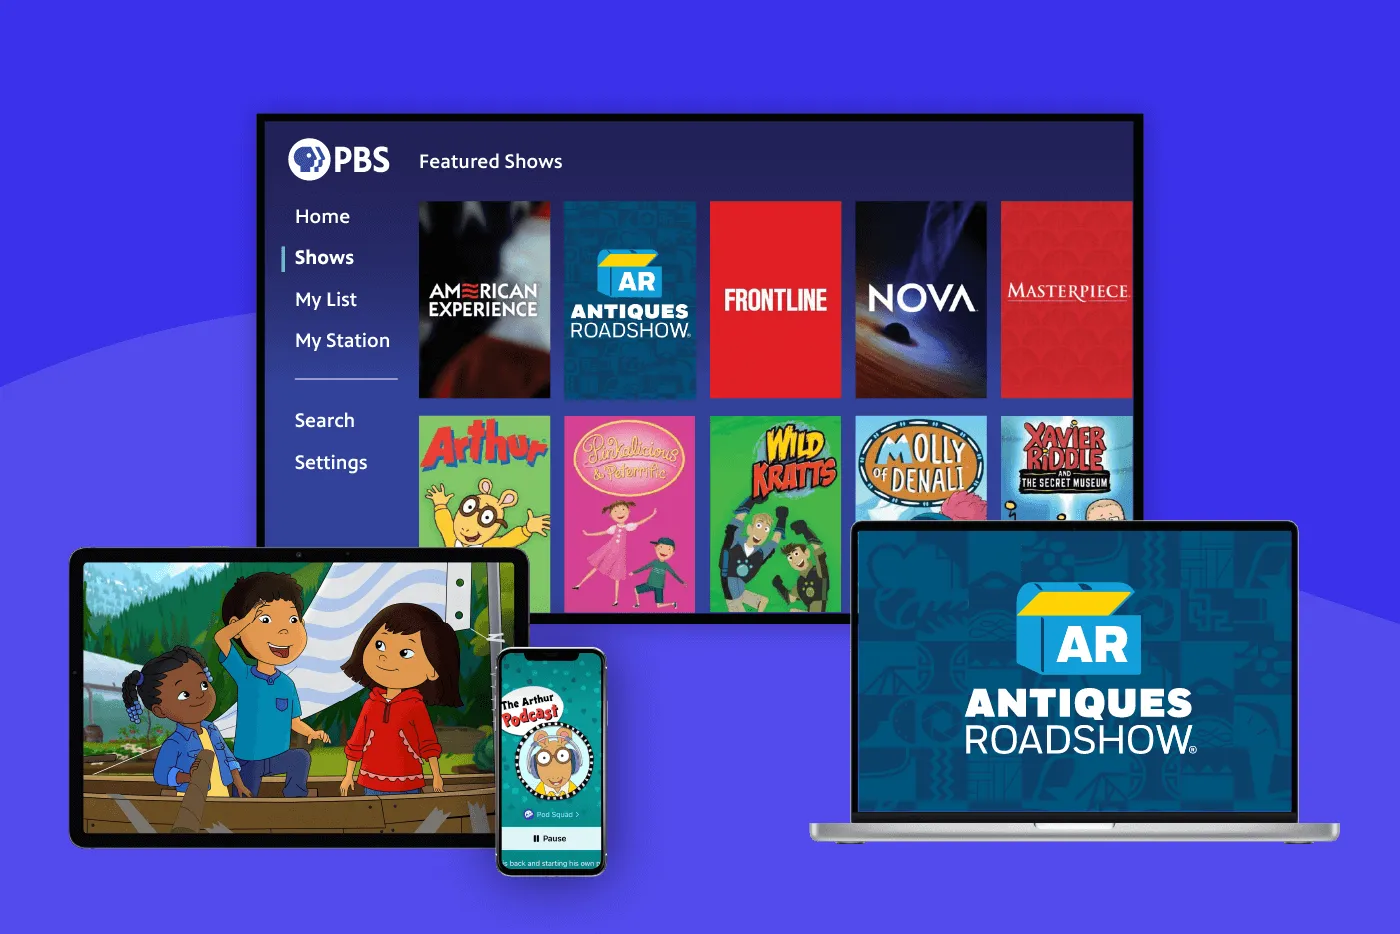 PBS streaming platform shown on TV displaying featured shows and menus. Portable devices below include a tablet with an animated children's program, a smartphone app screen with a similar program, and a laptop with the "Antiques Roadshow" show highlighted.